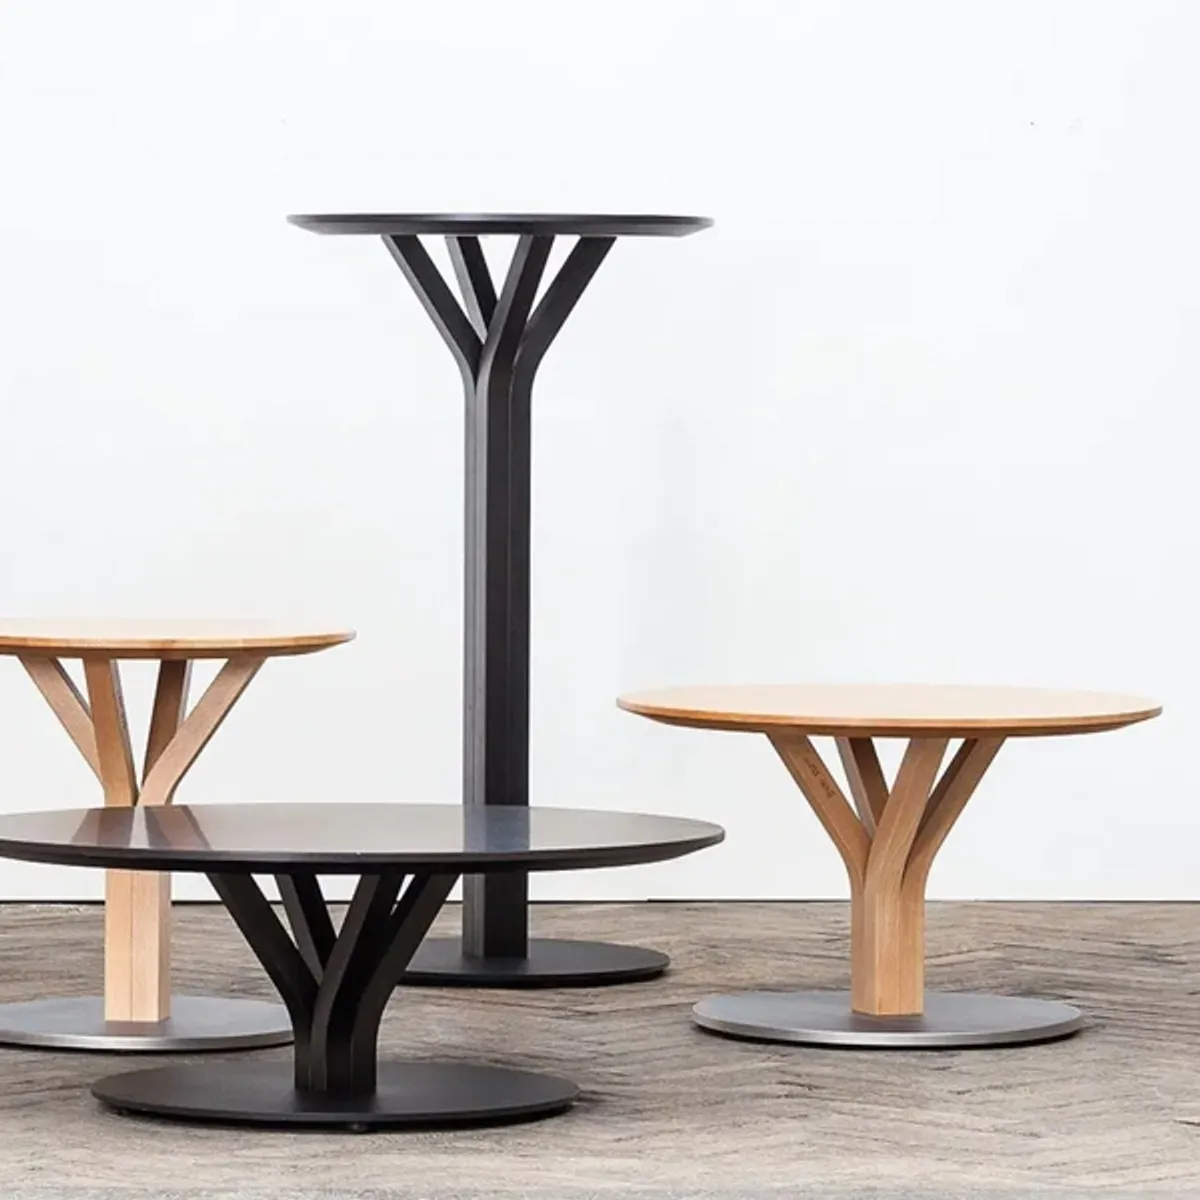 Albero round table Inside Out Contracts9